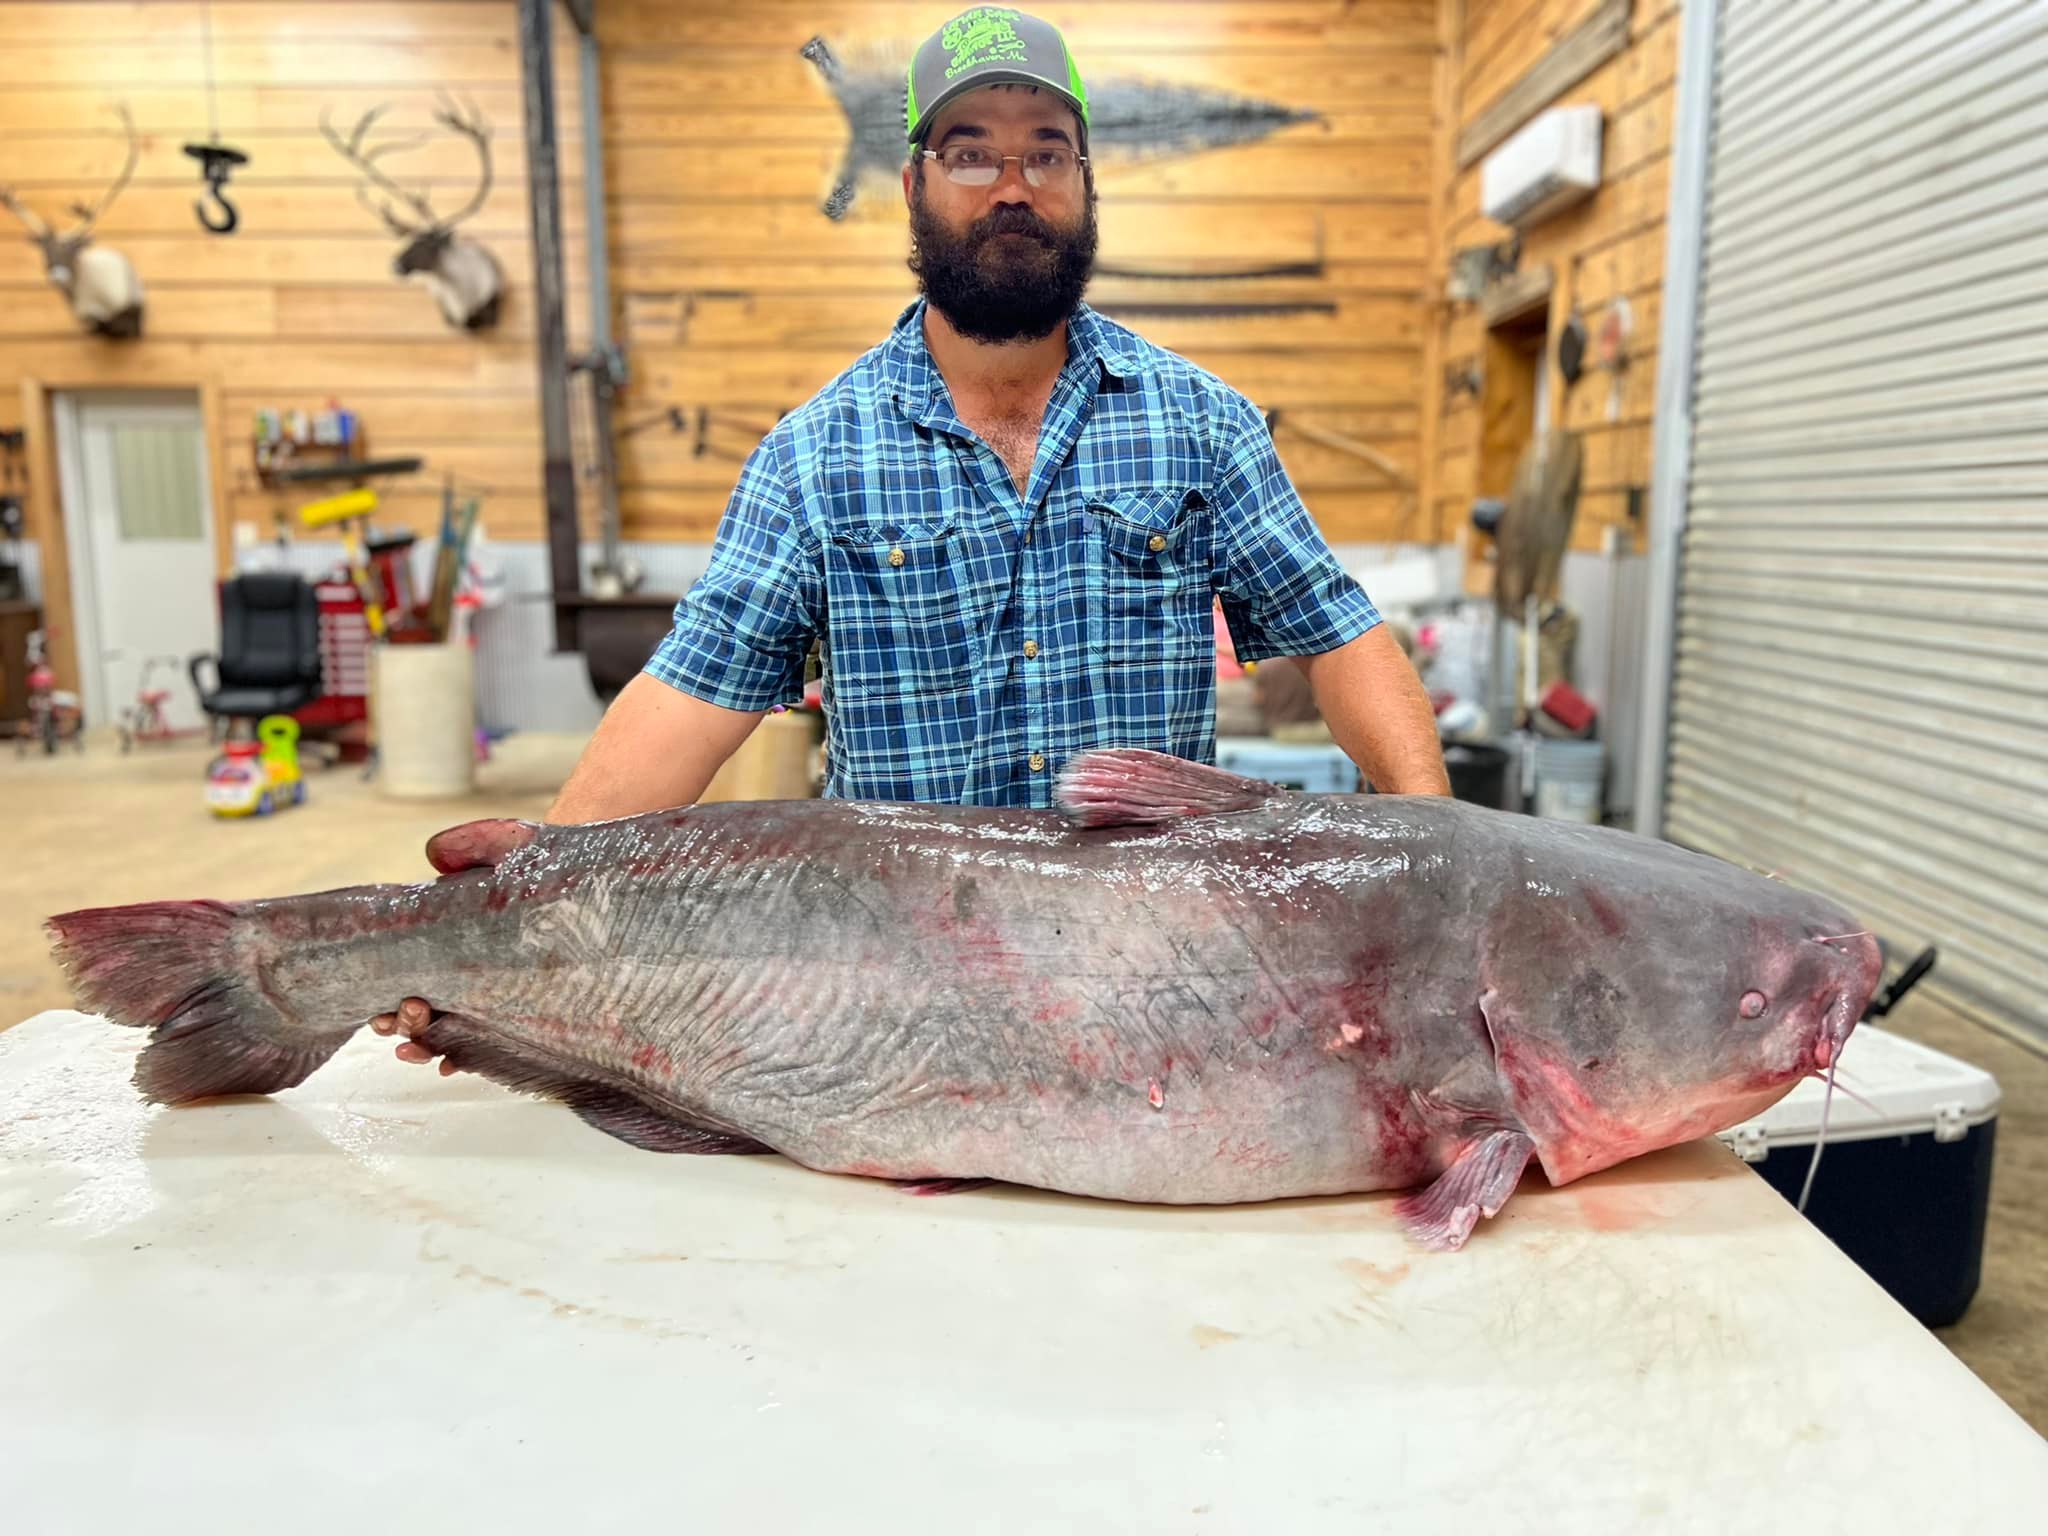 Mississippi Fisherman Catches Giant Blue Catfish with a Secret Family Bait Recipe